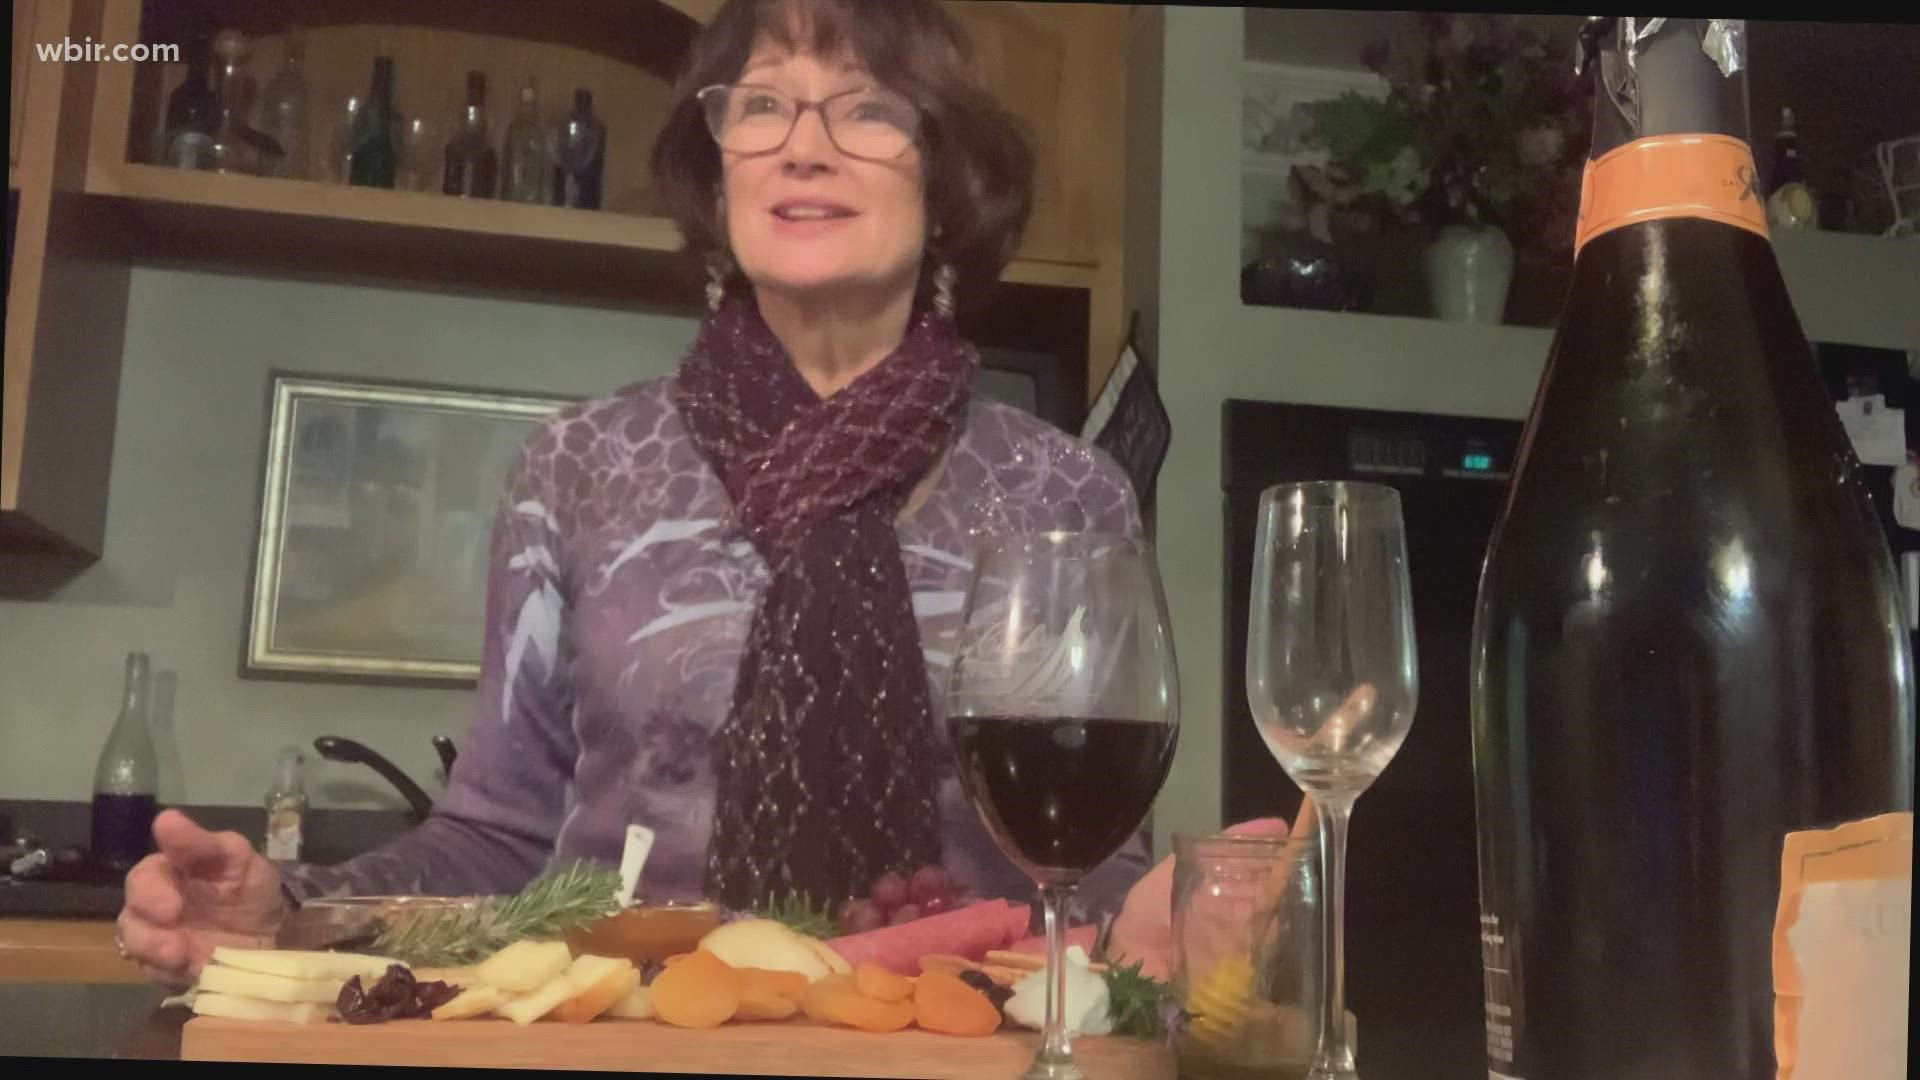 Terri Geiser, Manager of the UT Culinary Institute Community Cooking Classes shares some tips on wine and cheese pairings for your holiday parties. Nov. 30, 2021-4pm